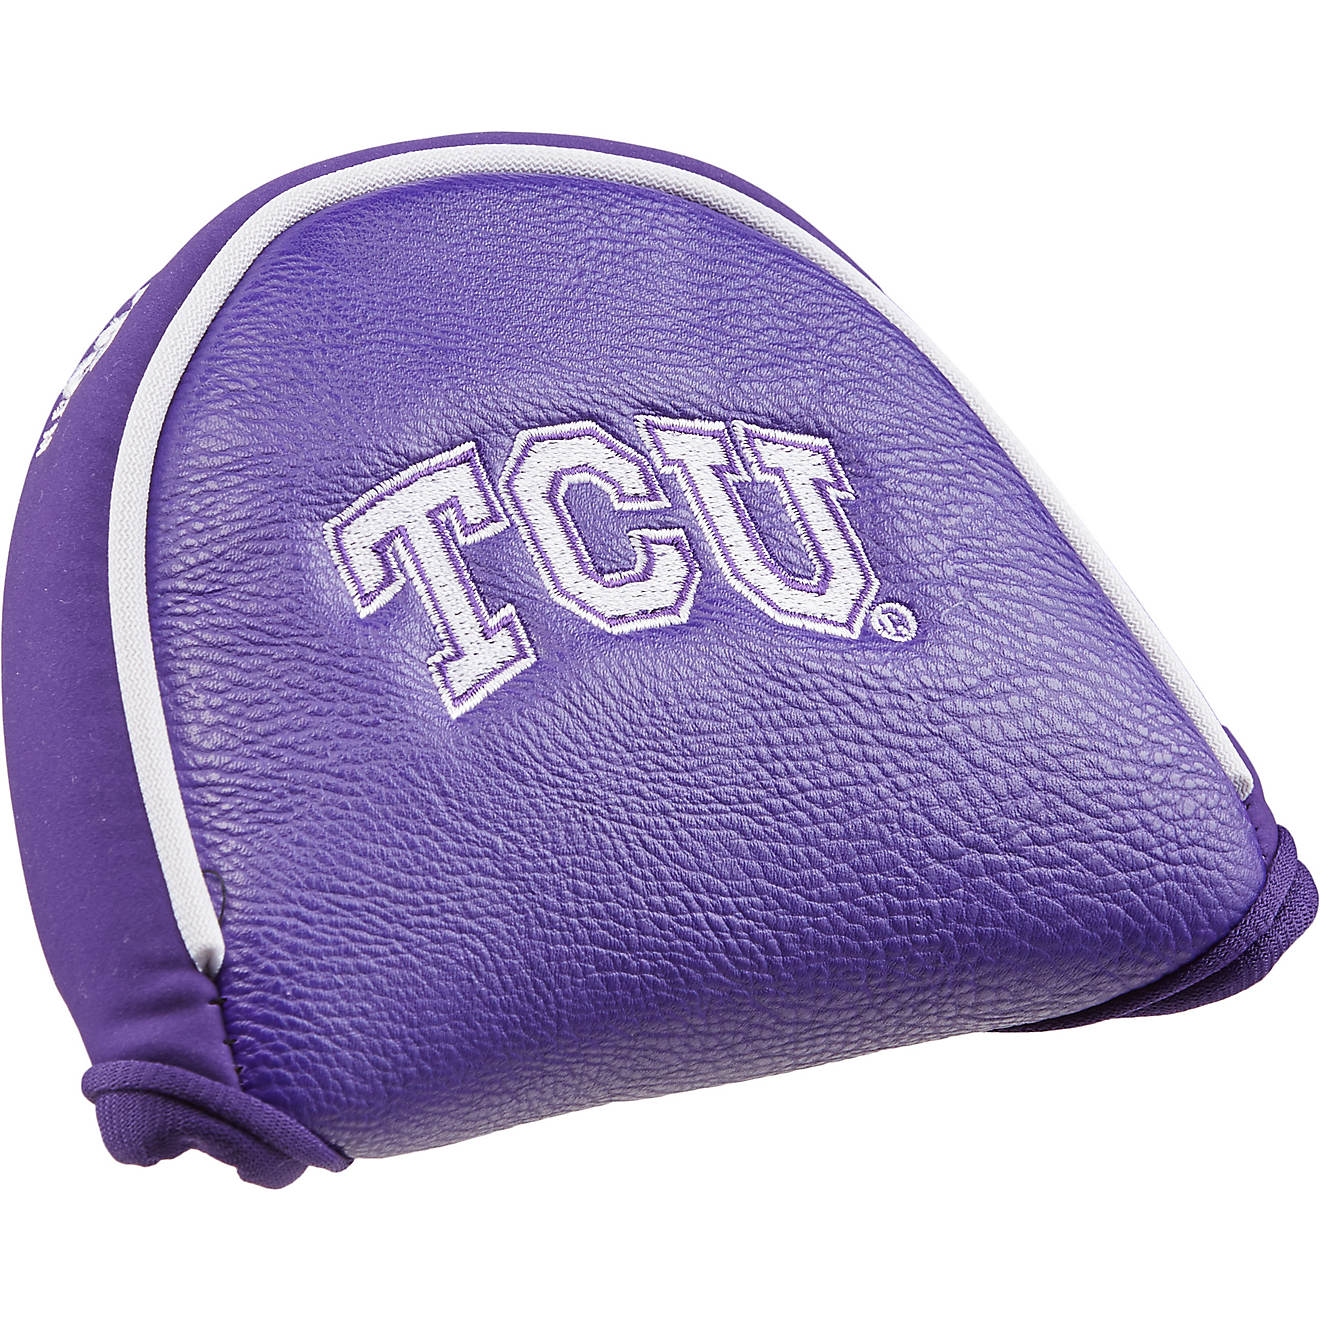 Team Golf Texas Christian University Mallet Putter Cover                                                                         - view number 1